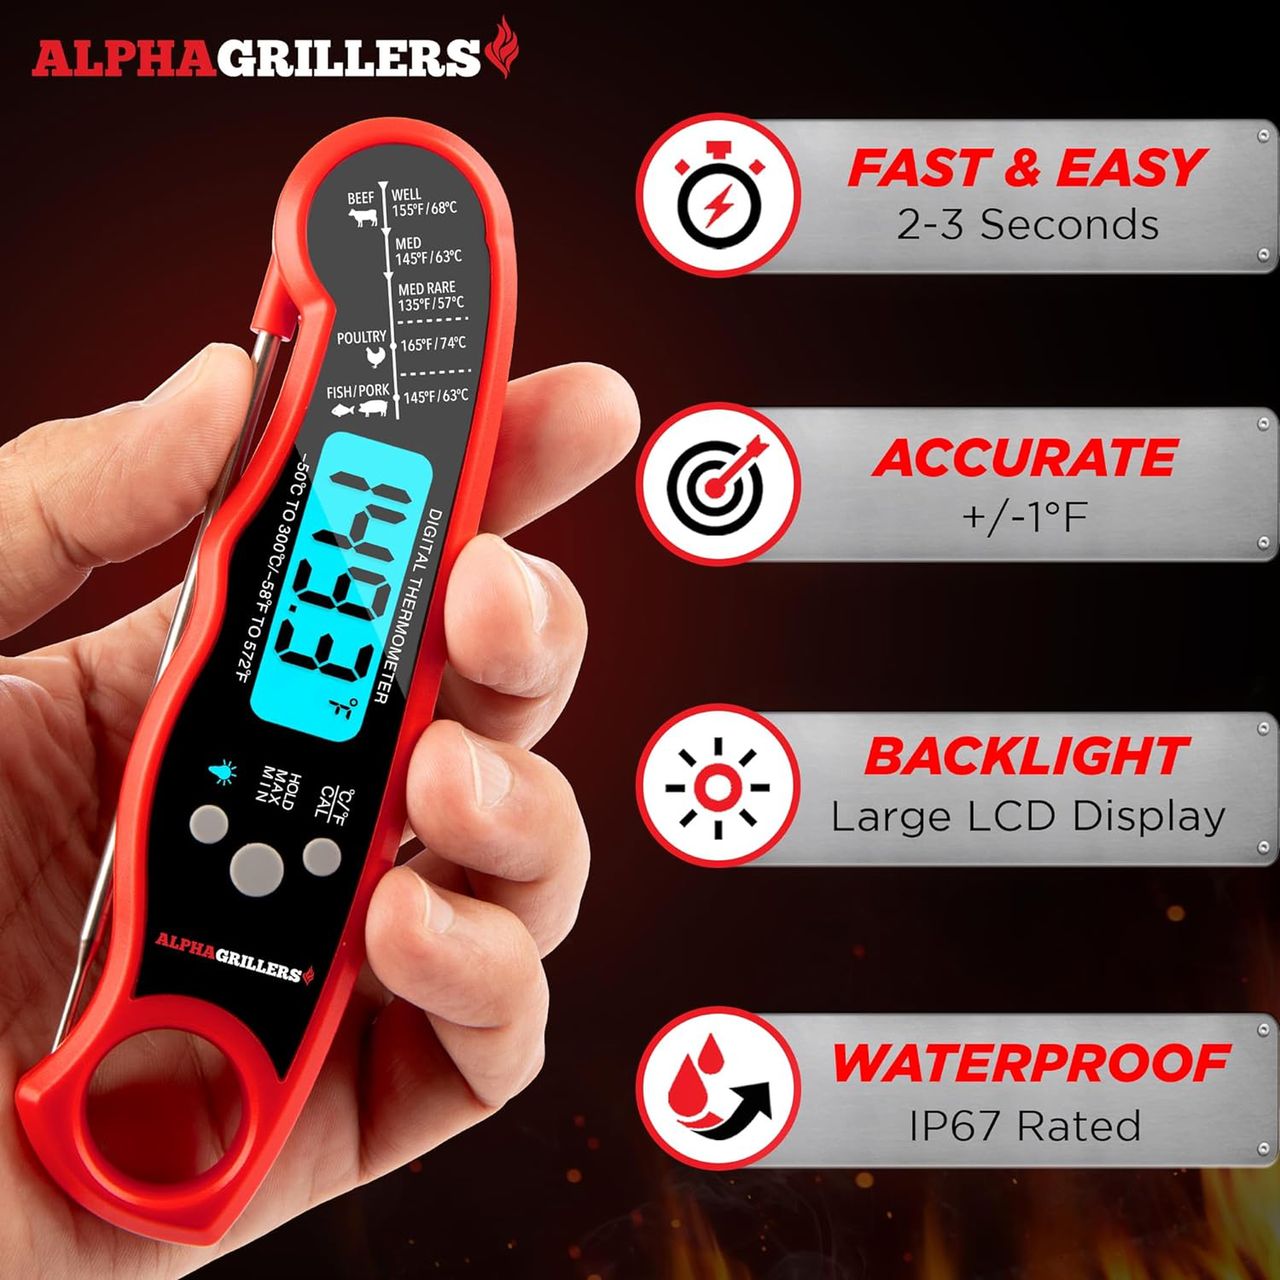 Alpha Grillers Instant Read Meat Thermometer for Grill and Cooking
